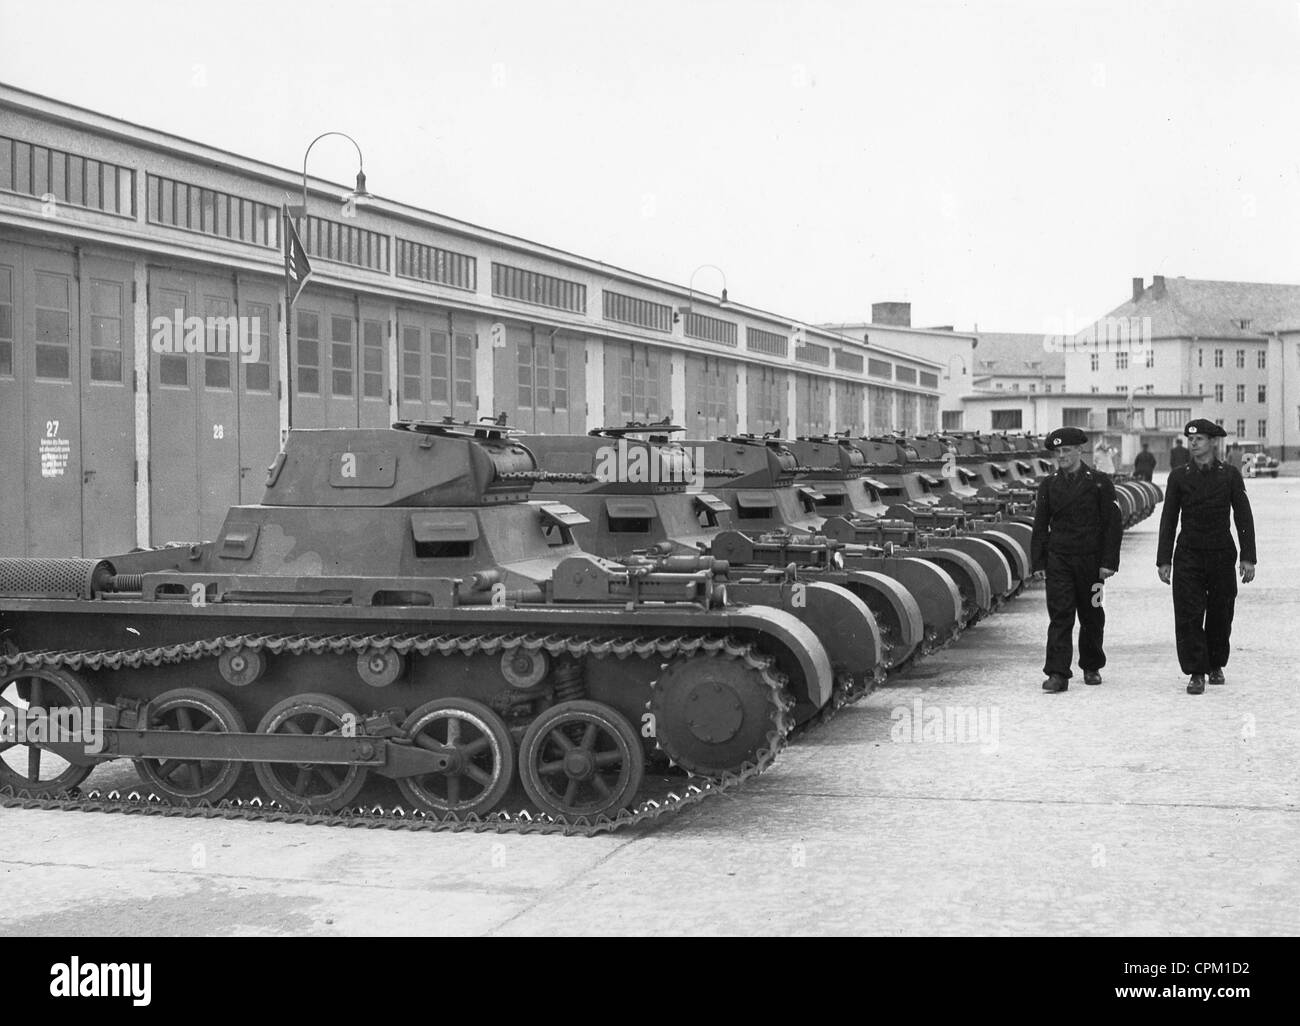 Panzer I at the armored regiment in the barracks in WÃ¼nsdorf, 1935 Stock Photo